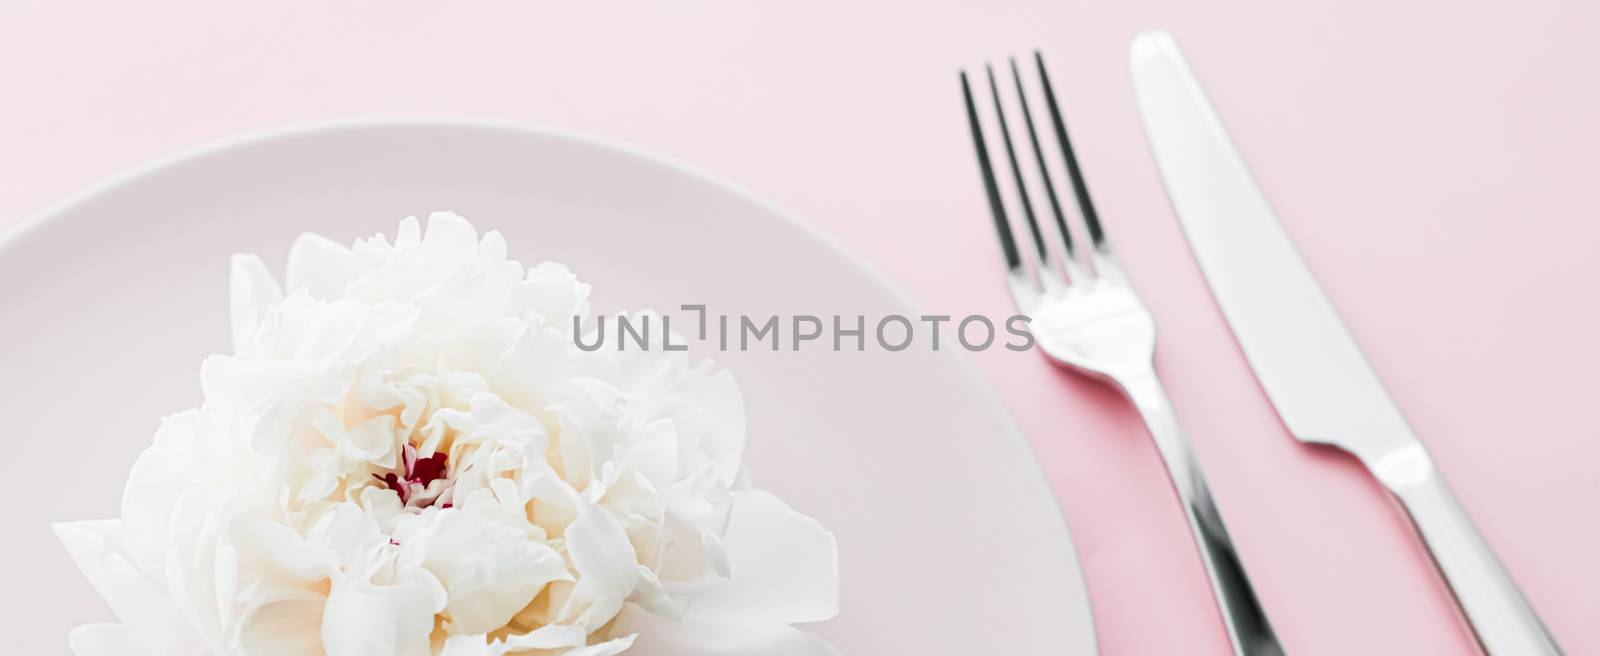 Dining plate and cutlery with peony flower as wedding decor set on pink background, top tableware for event decoration and dessert menu by Anneleven